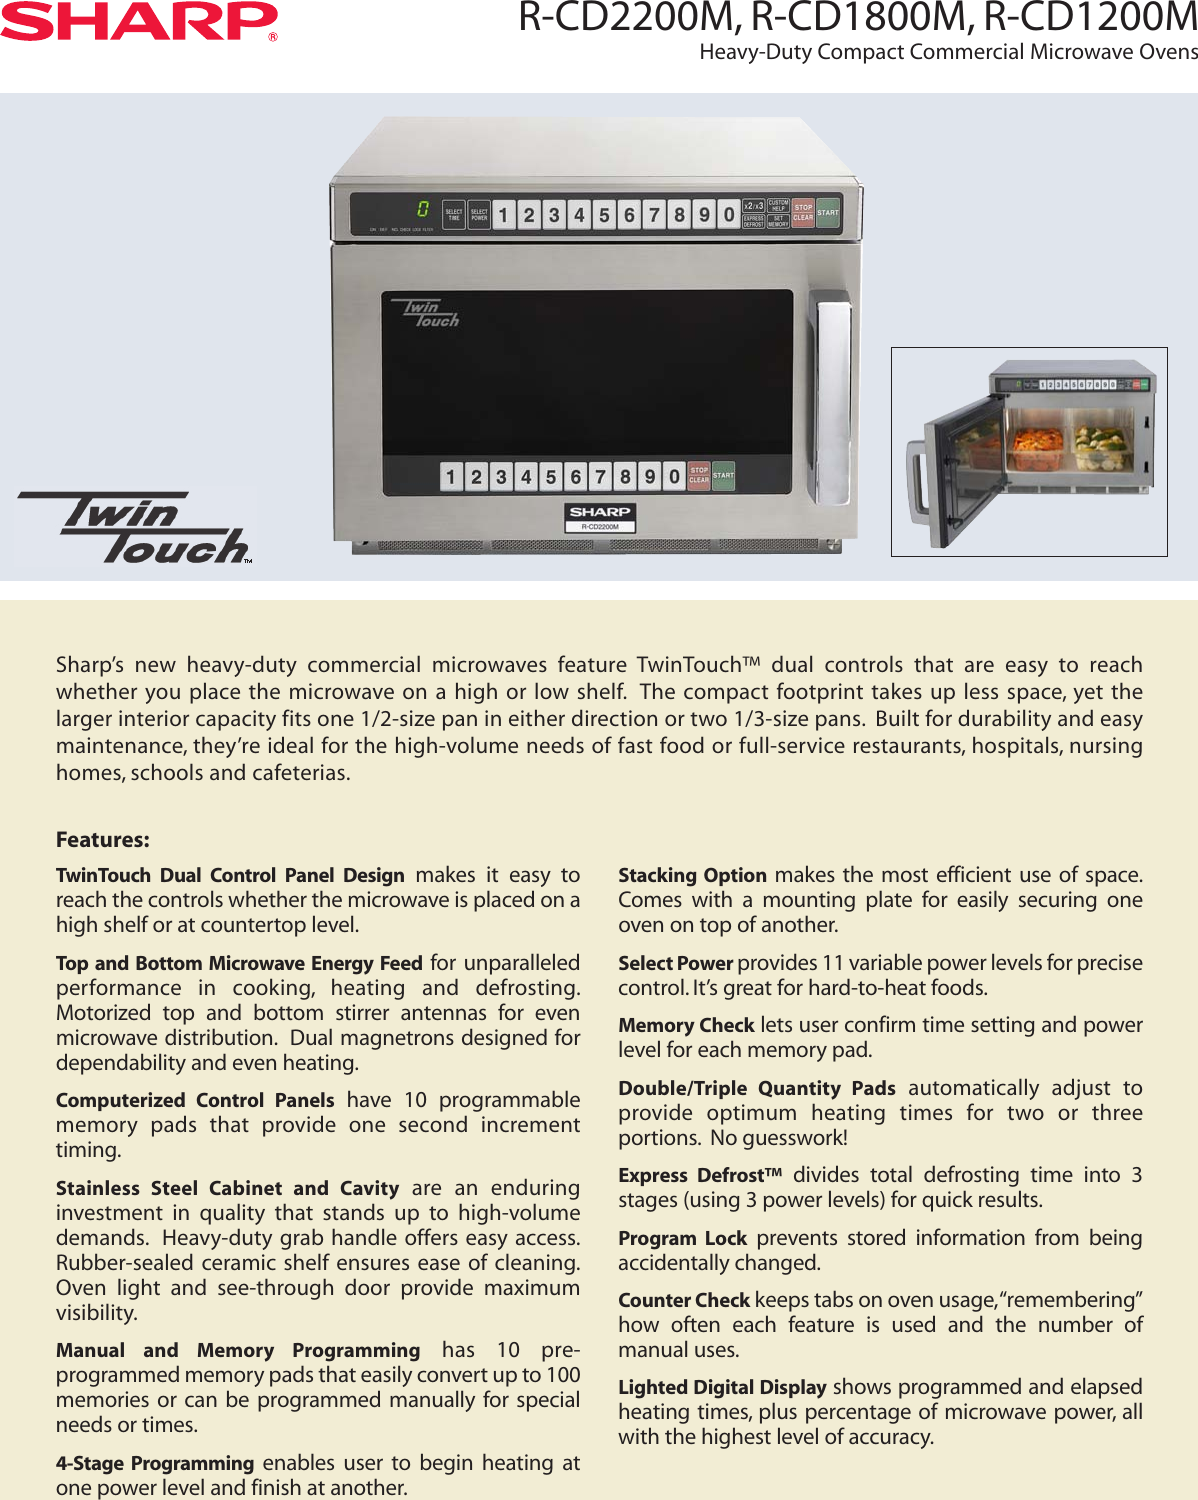 Page 1 of 2 - Sharp Sharp-Sharp-Microwave-Oven-R-Cd1200M-Users-Manual- R-CD1200M | R-CD1800M R-CD2200M Operation Manual  Sharp-sharp-microwave-oven-r-cd1200m-users-manual